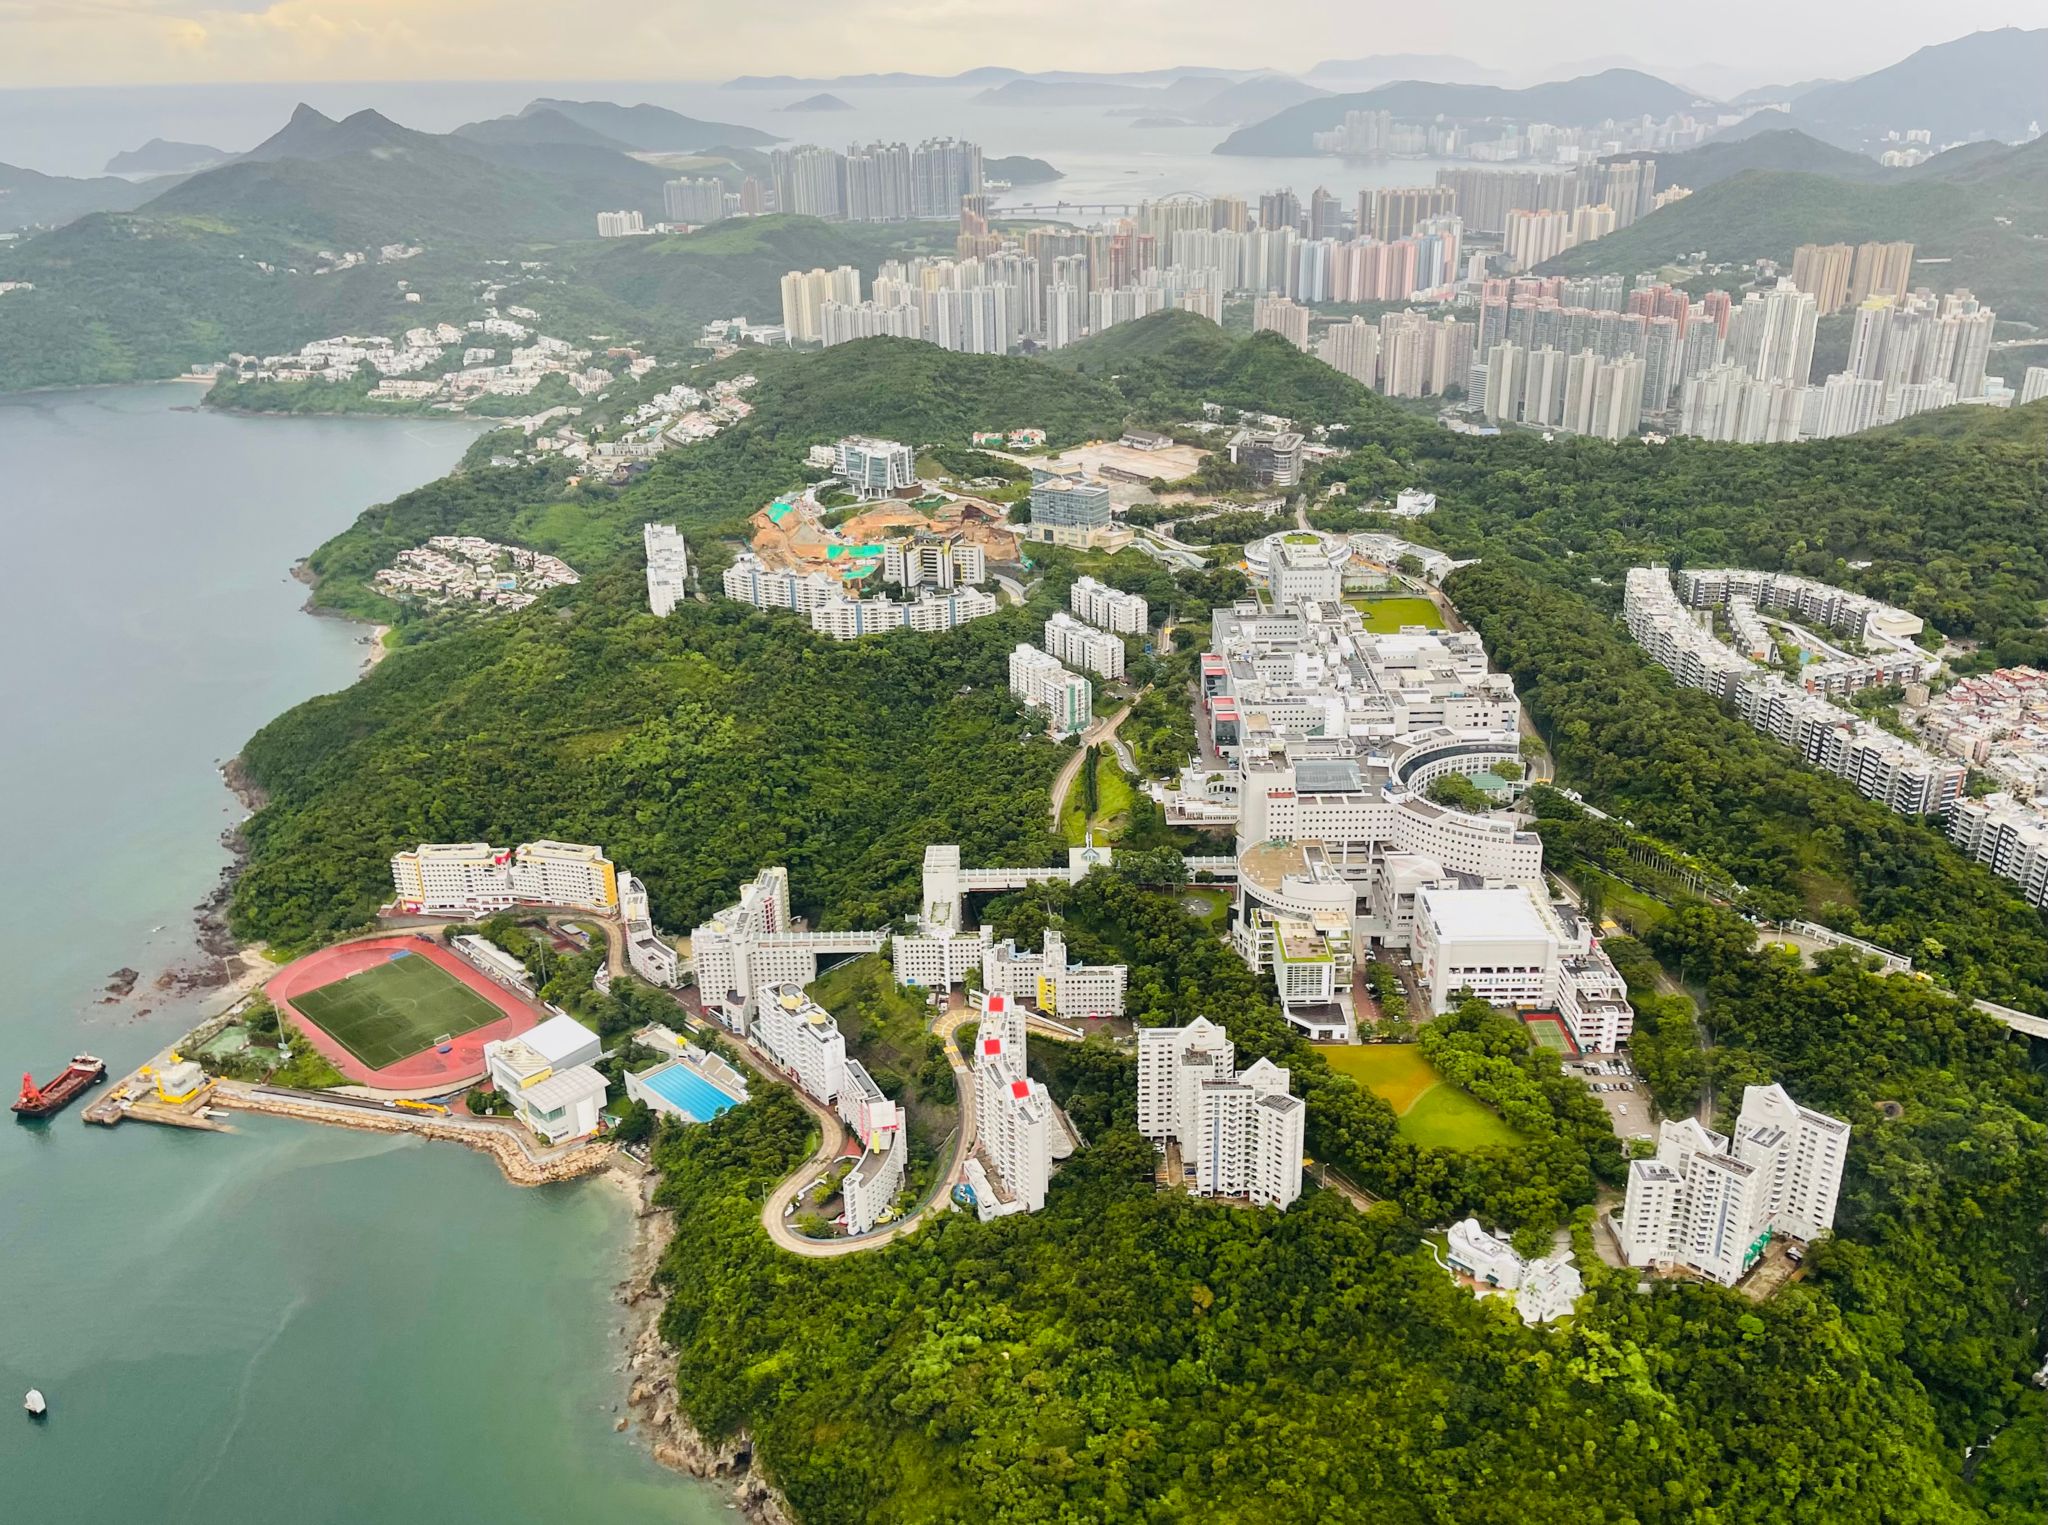 HKUST from above